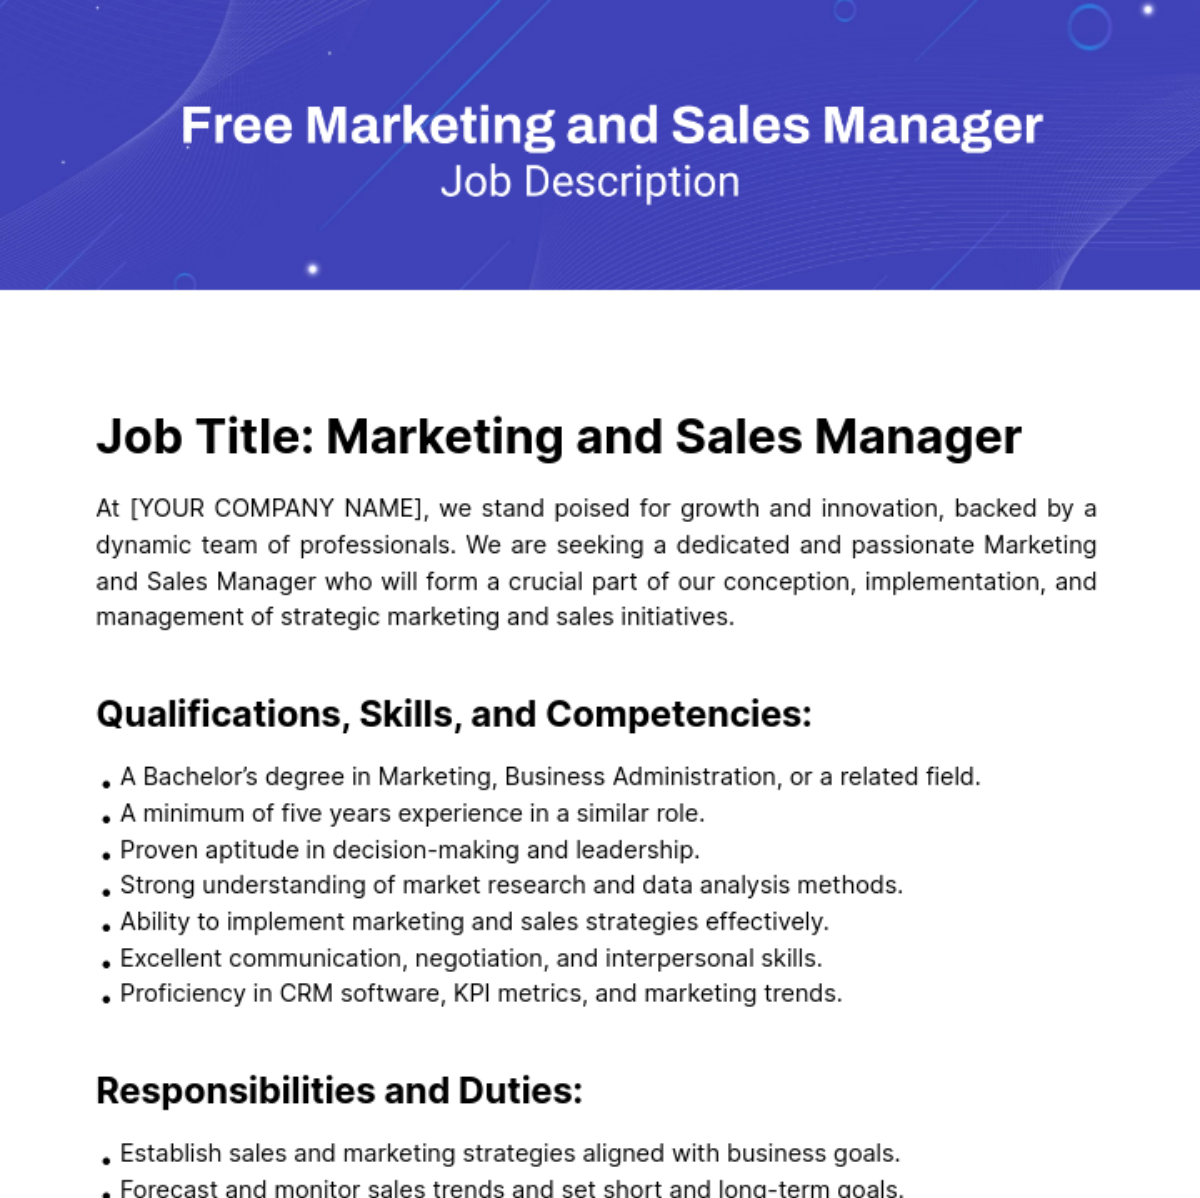 Marketing and Sales Manager Job Description Template